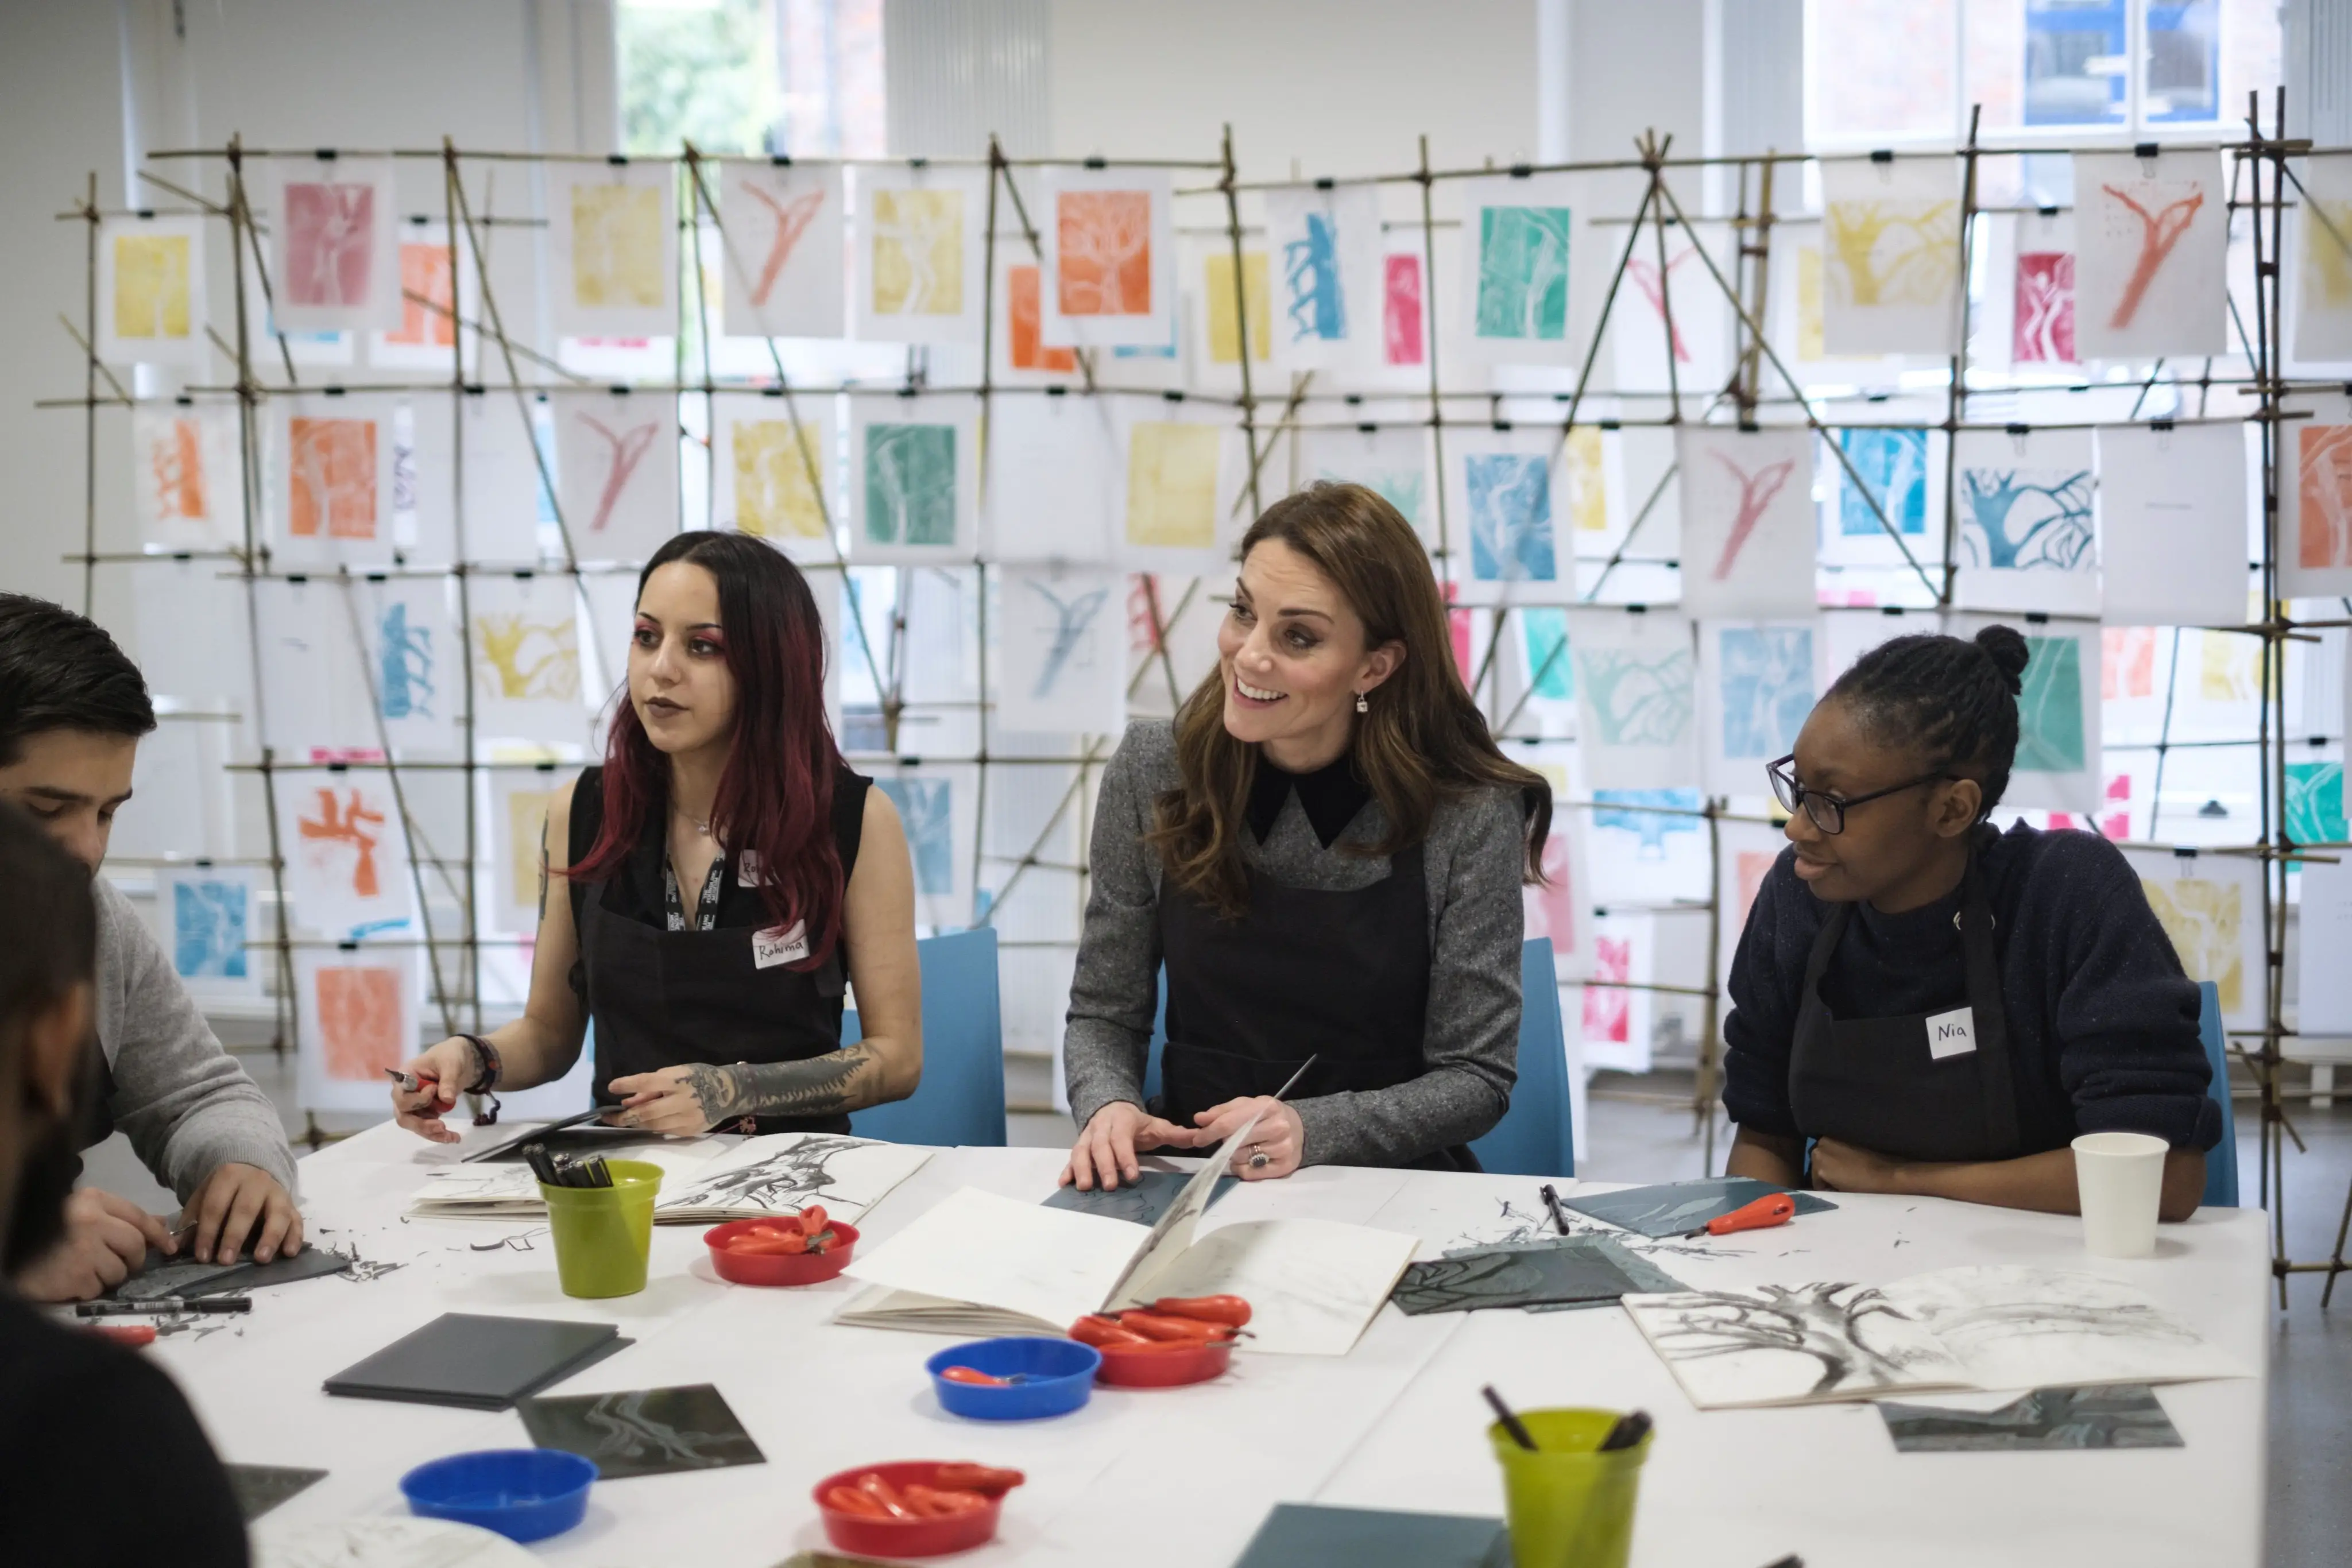 The Duchess of Cambridge joined them in a creative ‘Tracing our Tales’ training session